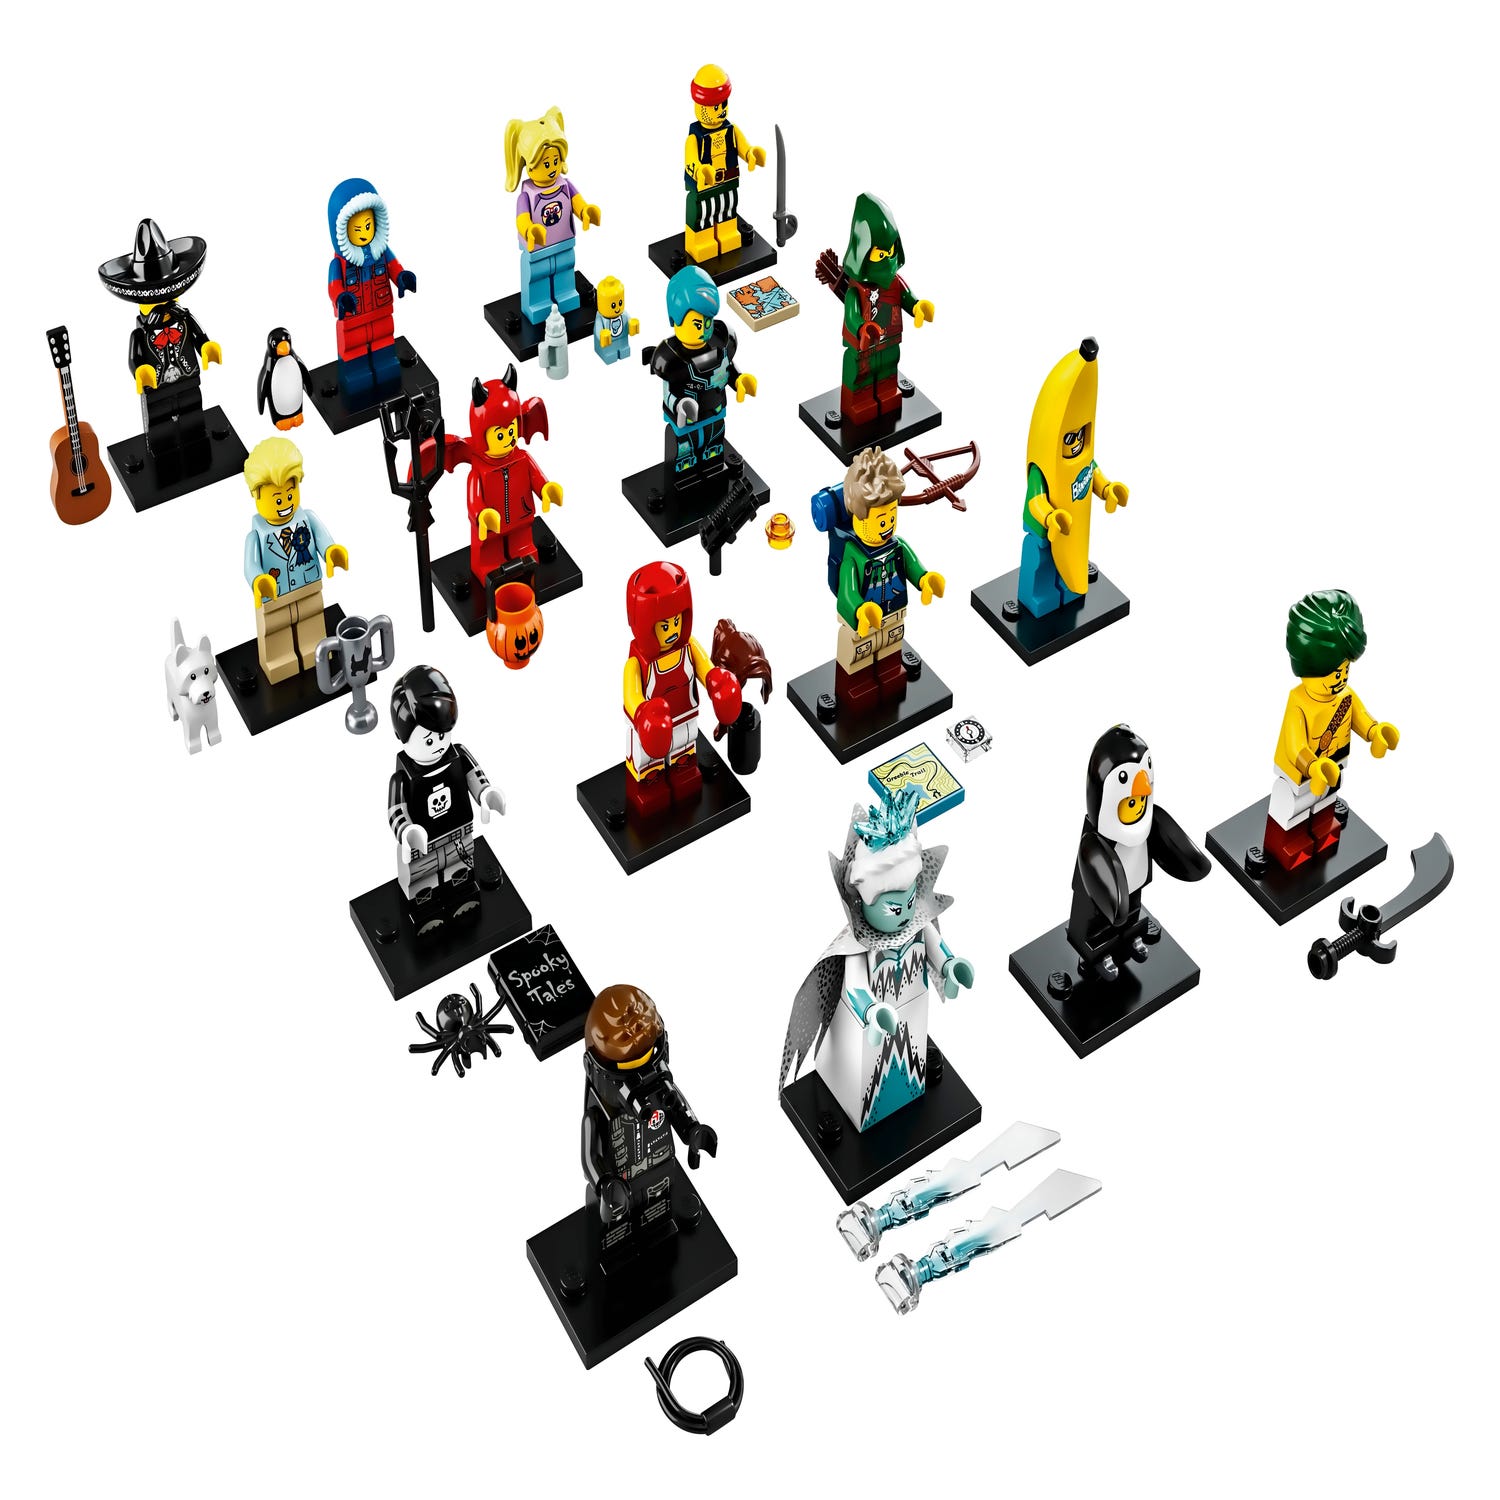 16 71013 | Minifigures | Buy online at the Official LEGO® Shop US